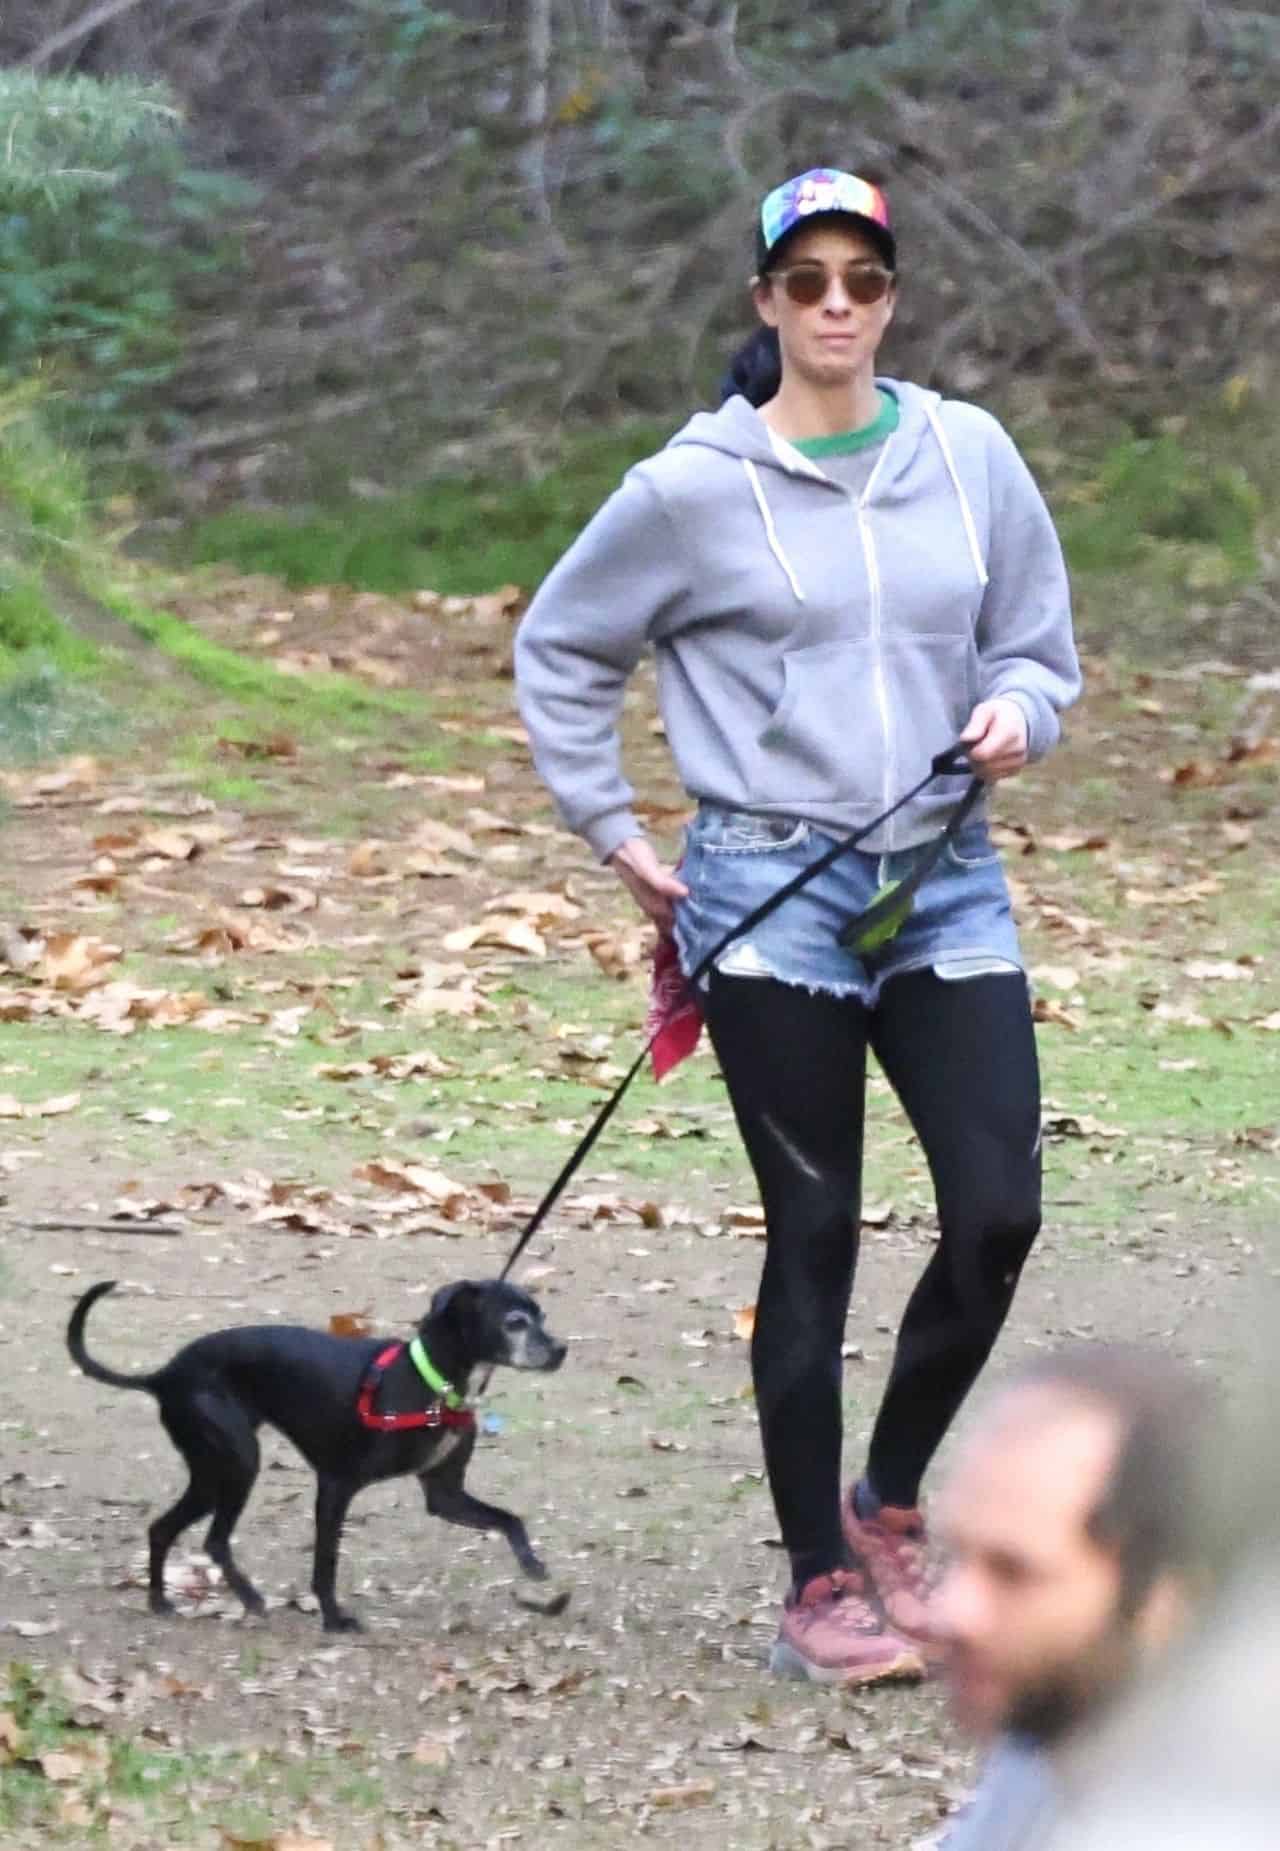 Sarah Silverman Takes Her Dog Mary for a Cozy Walk in a Park in Los Feliz